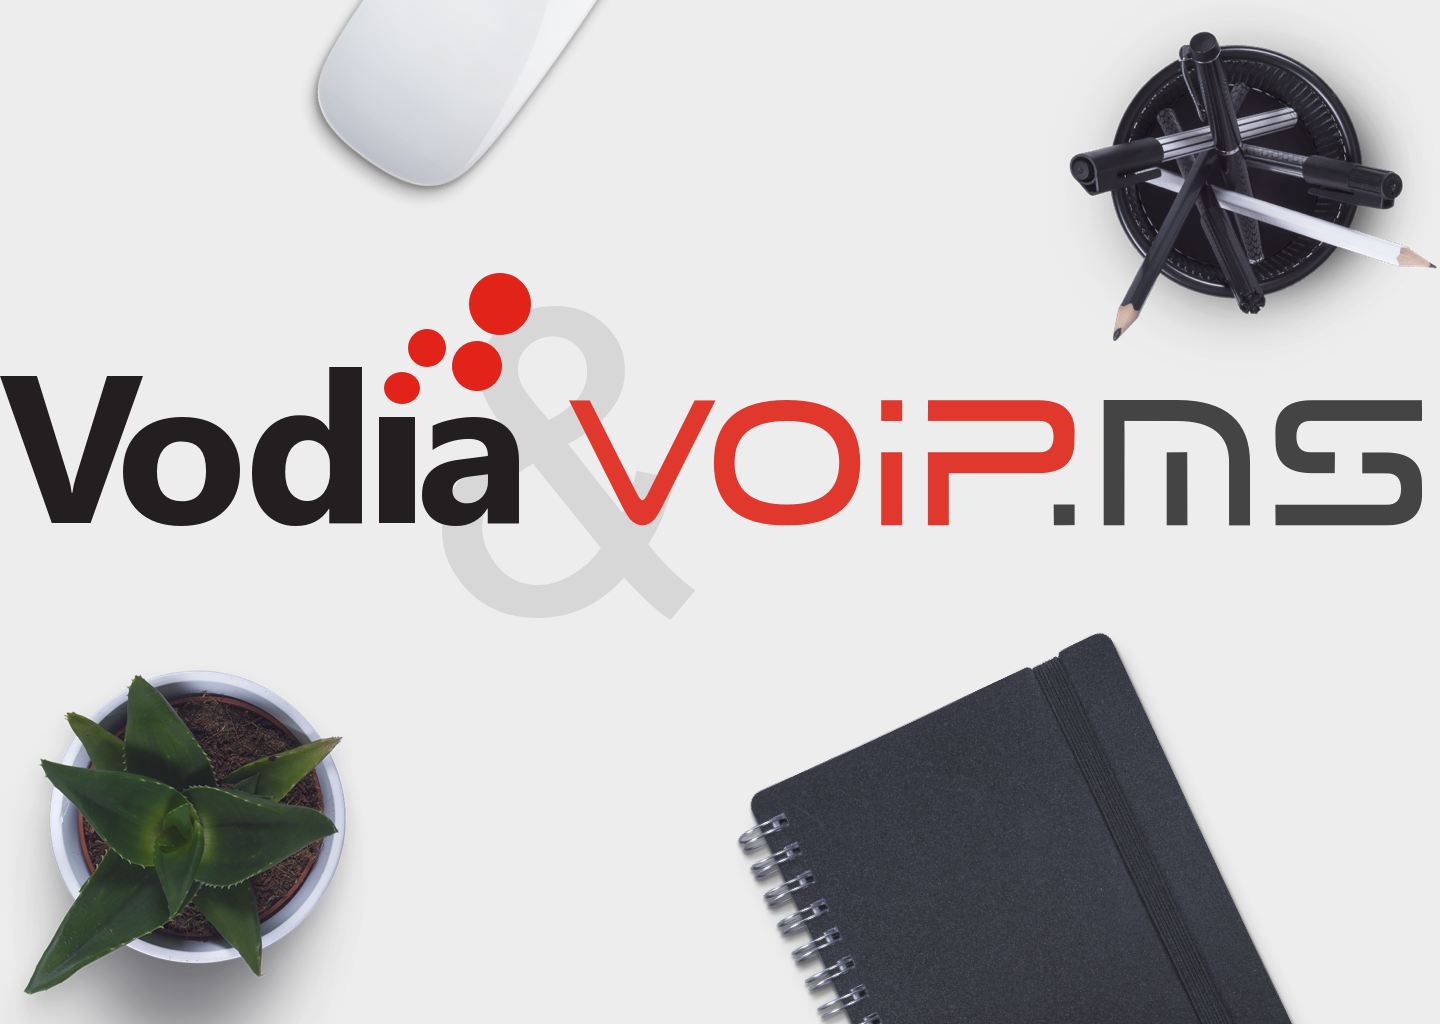 Vodia and voip.ms